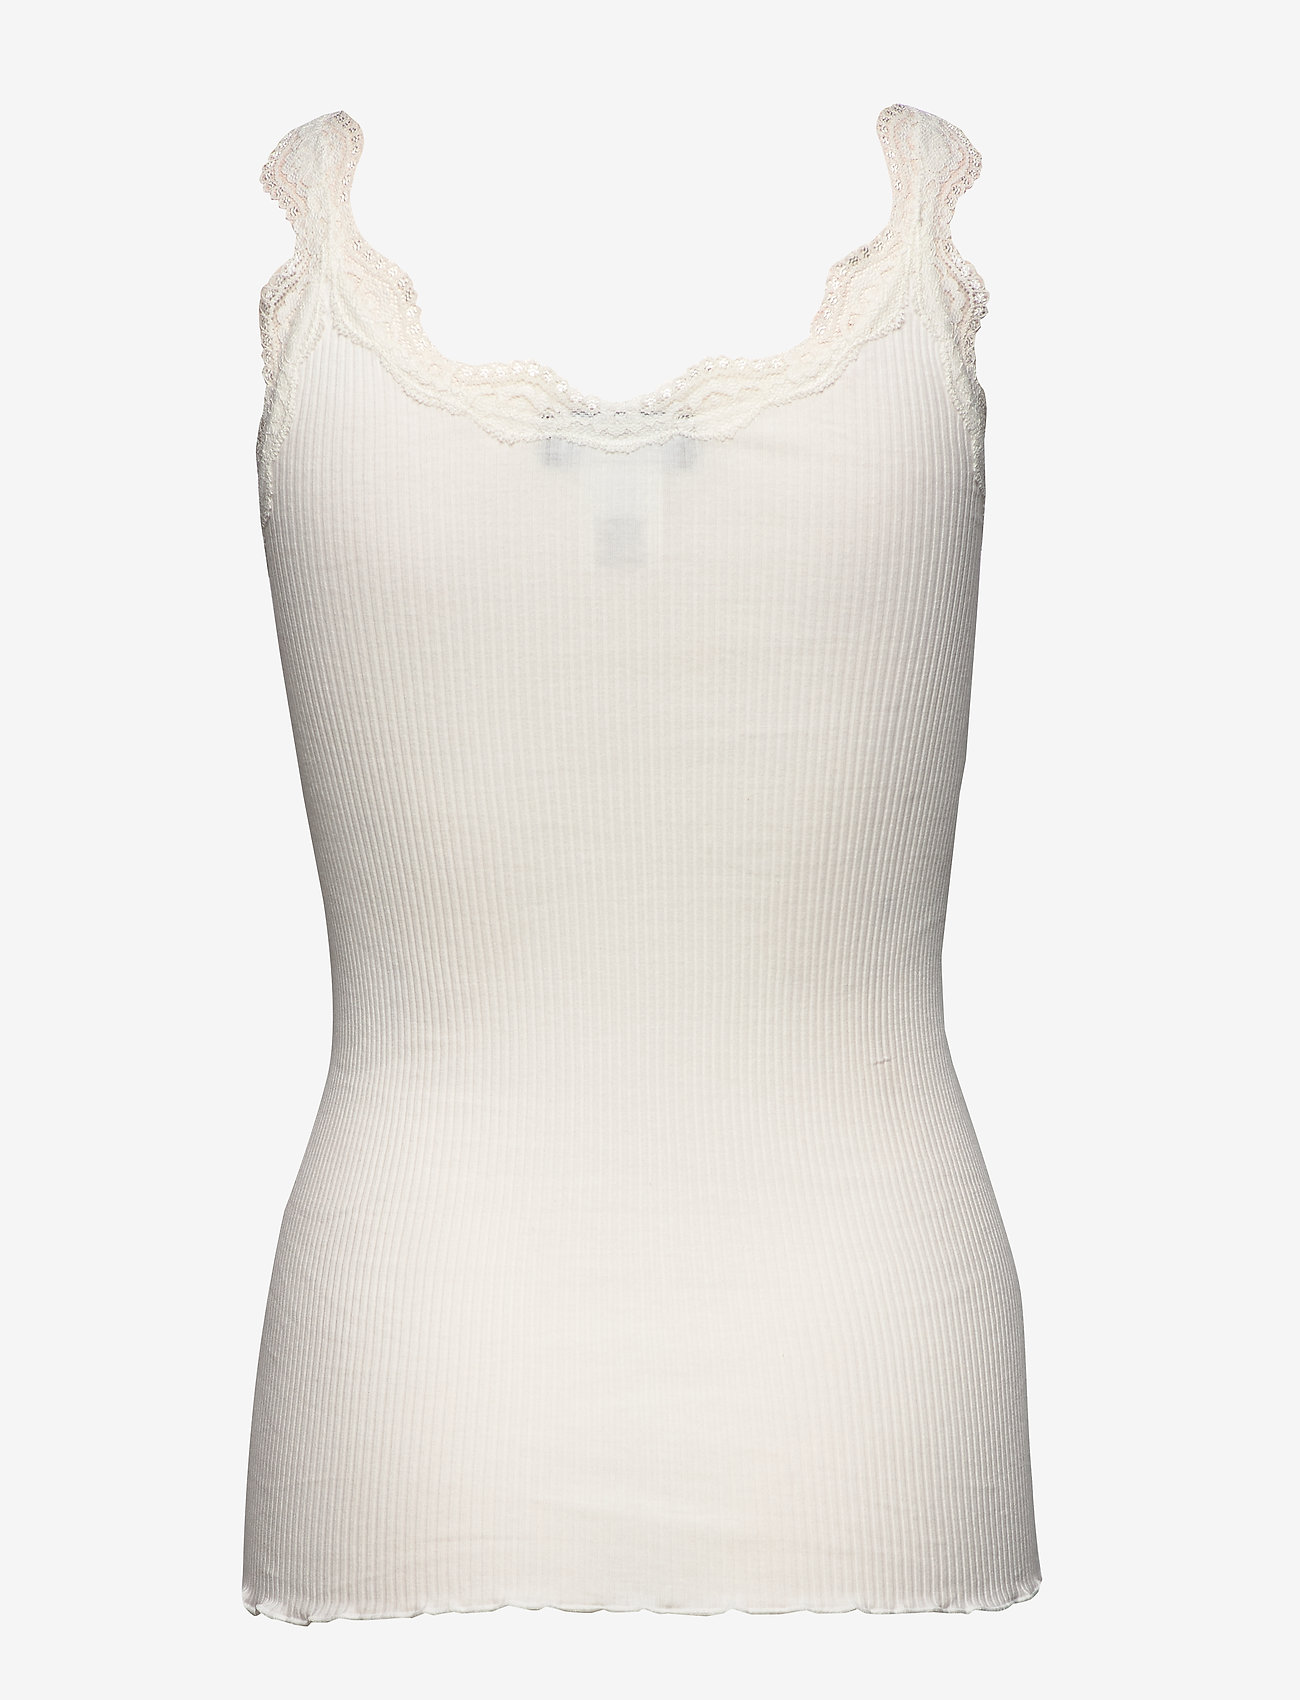 Rosemunde - Organic top w/ lace - lowest prices - ivory - 1